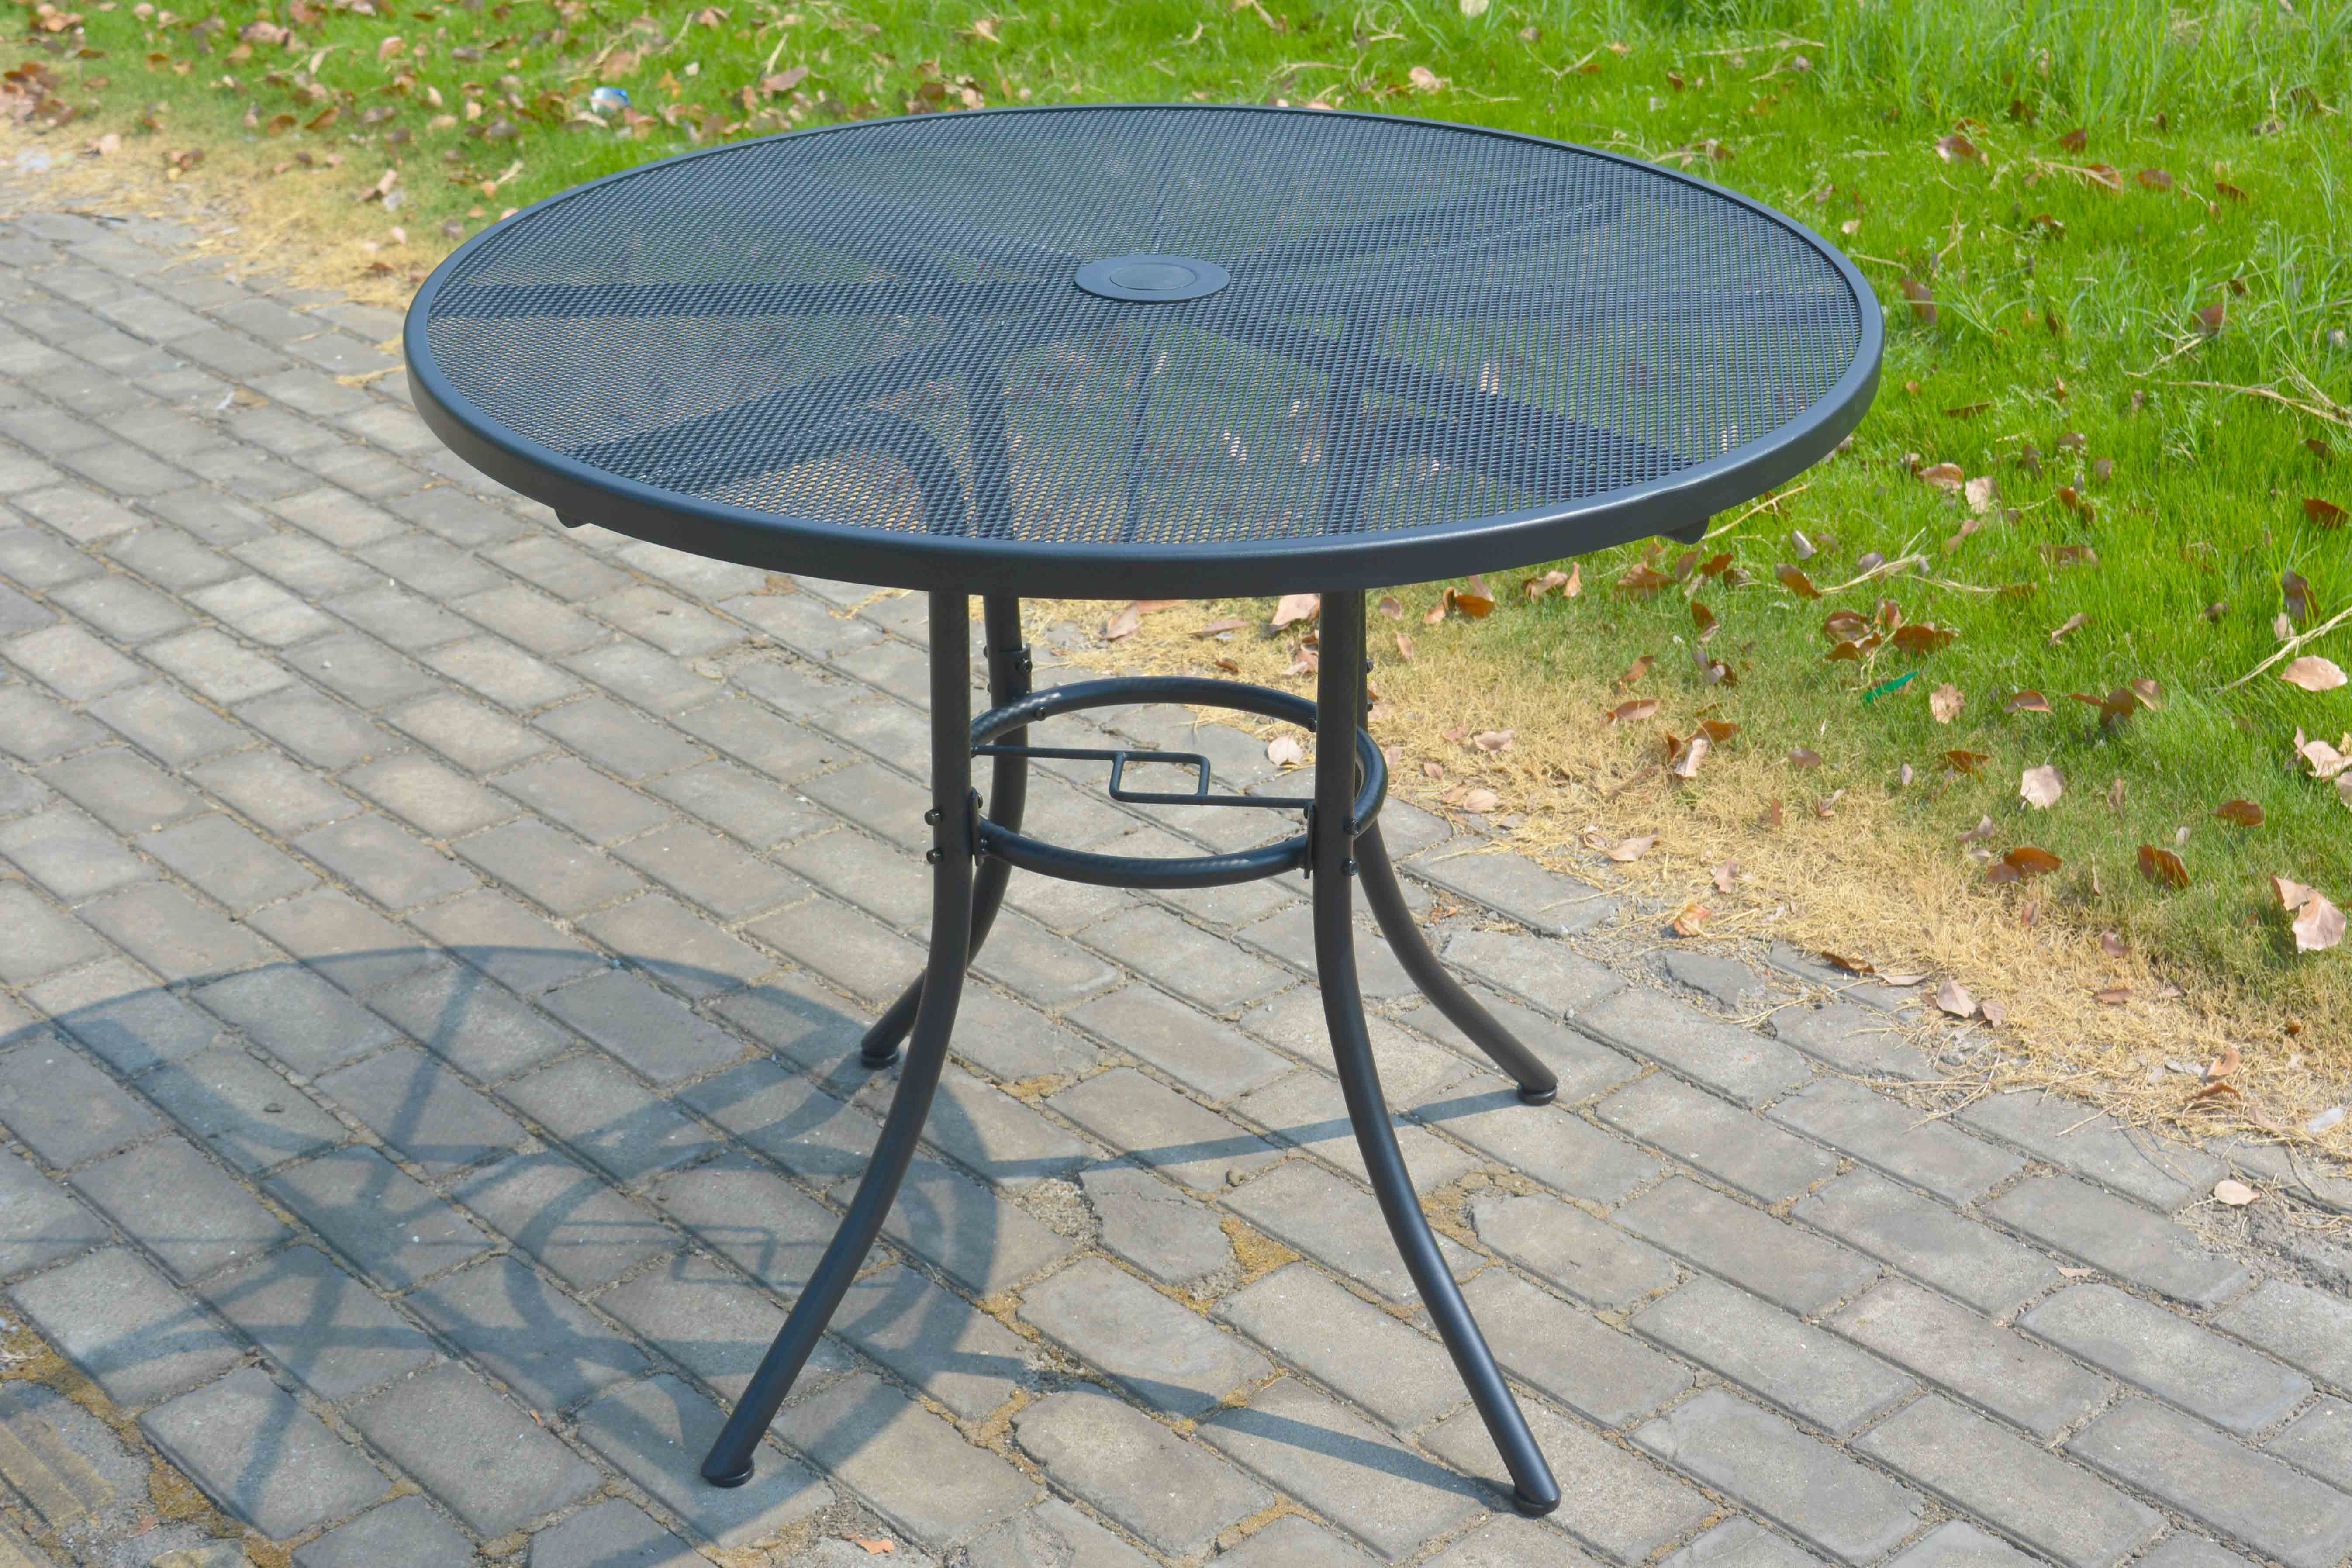 36” Round Table 29”H